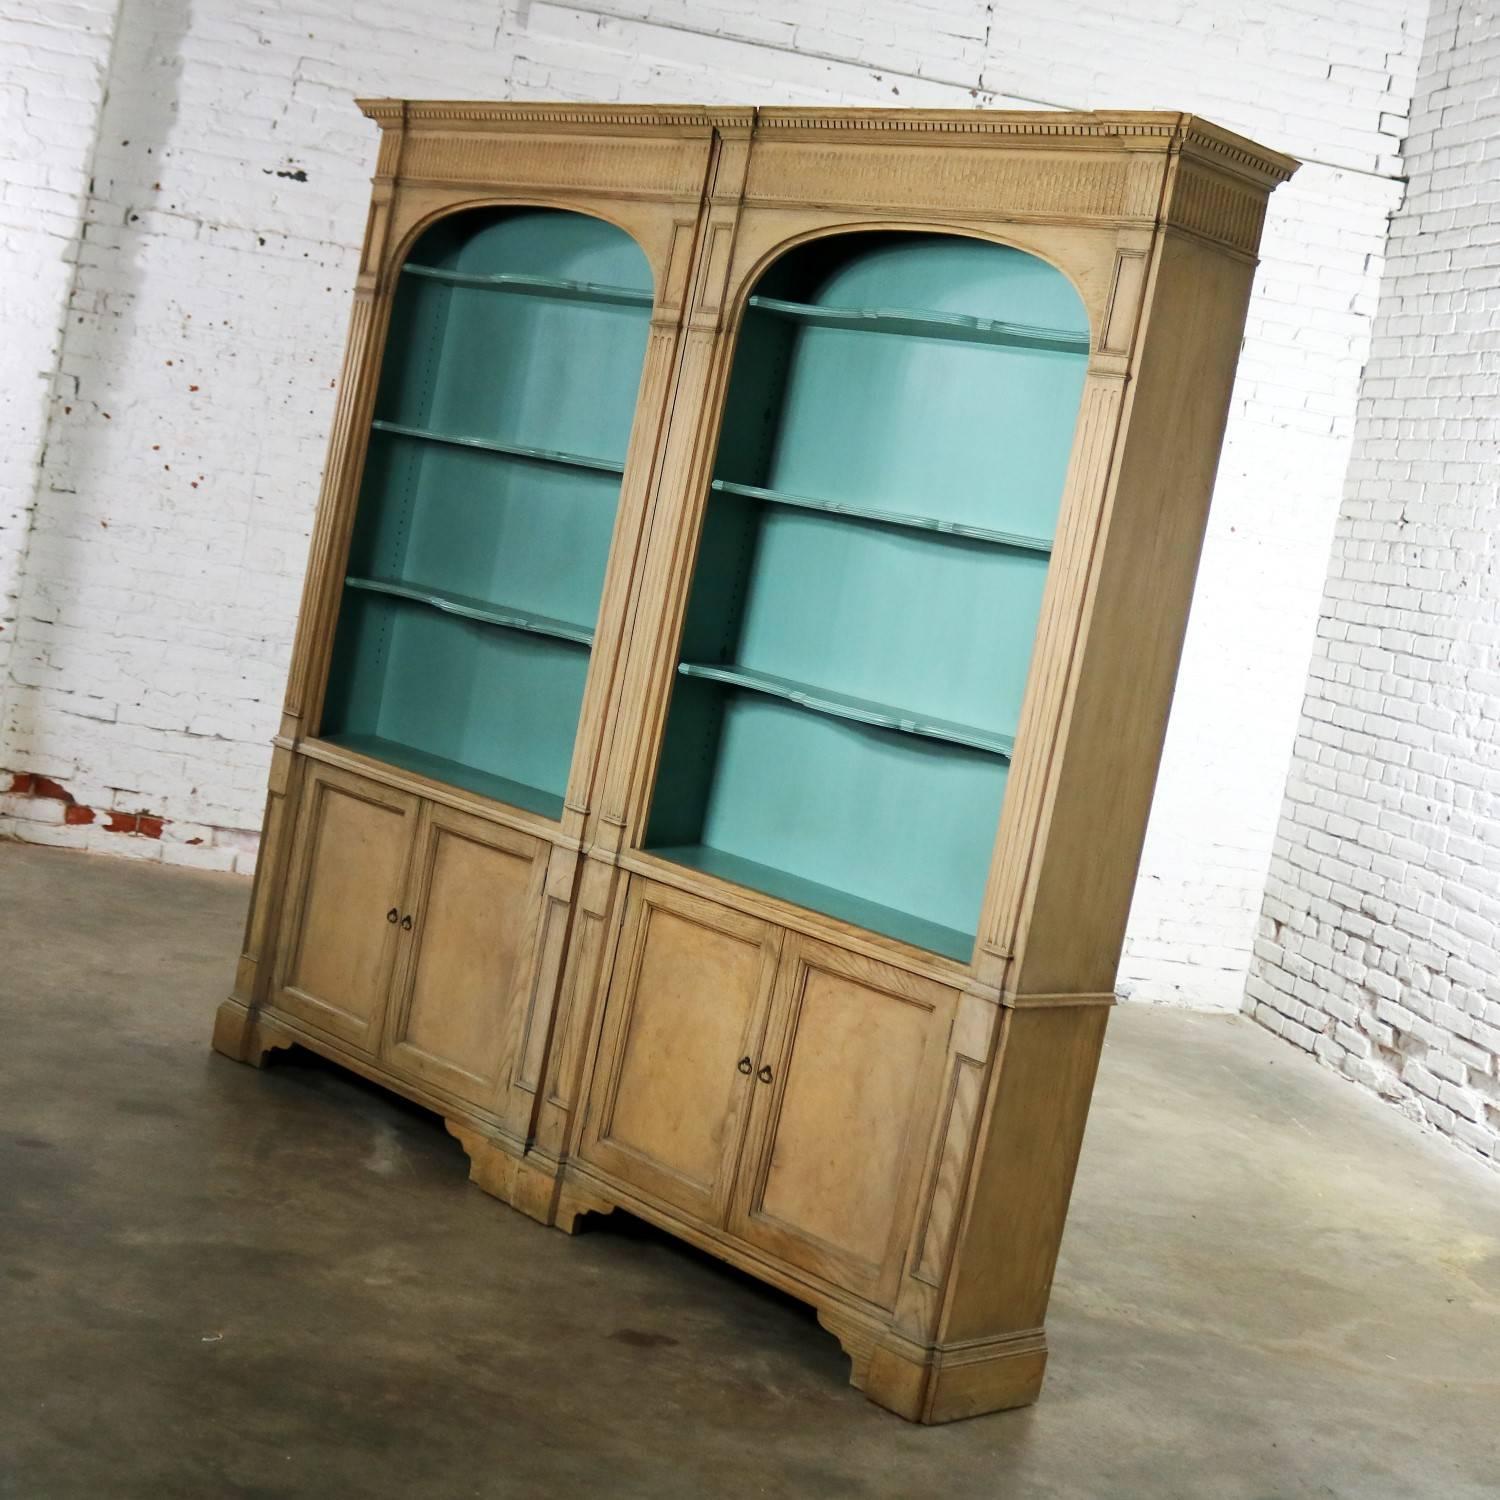 Painted French Style Cerused Bookcases with Turquoise Interior by Baker Furniture